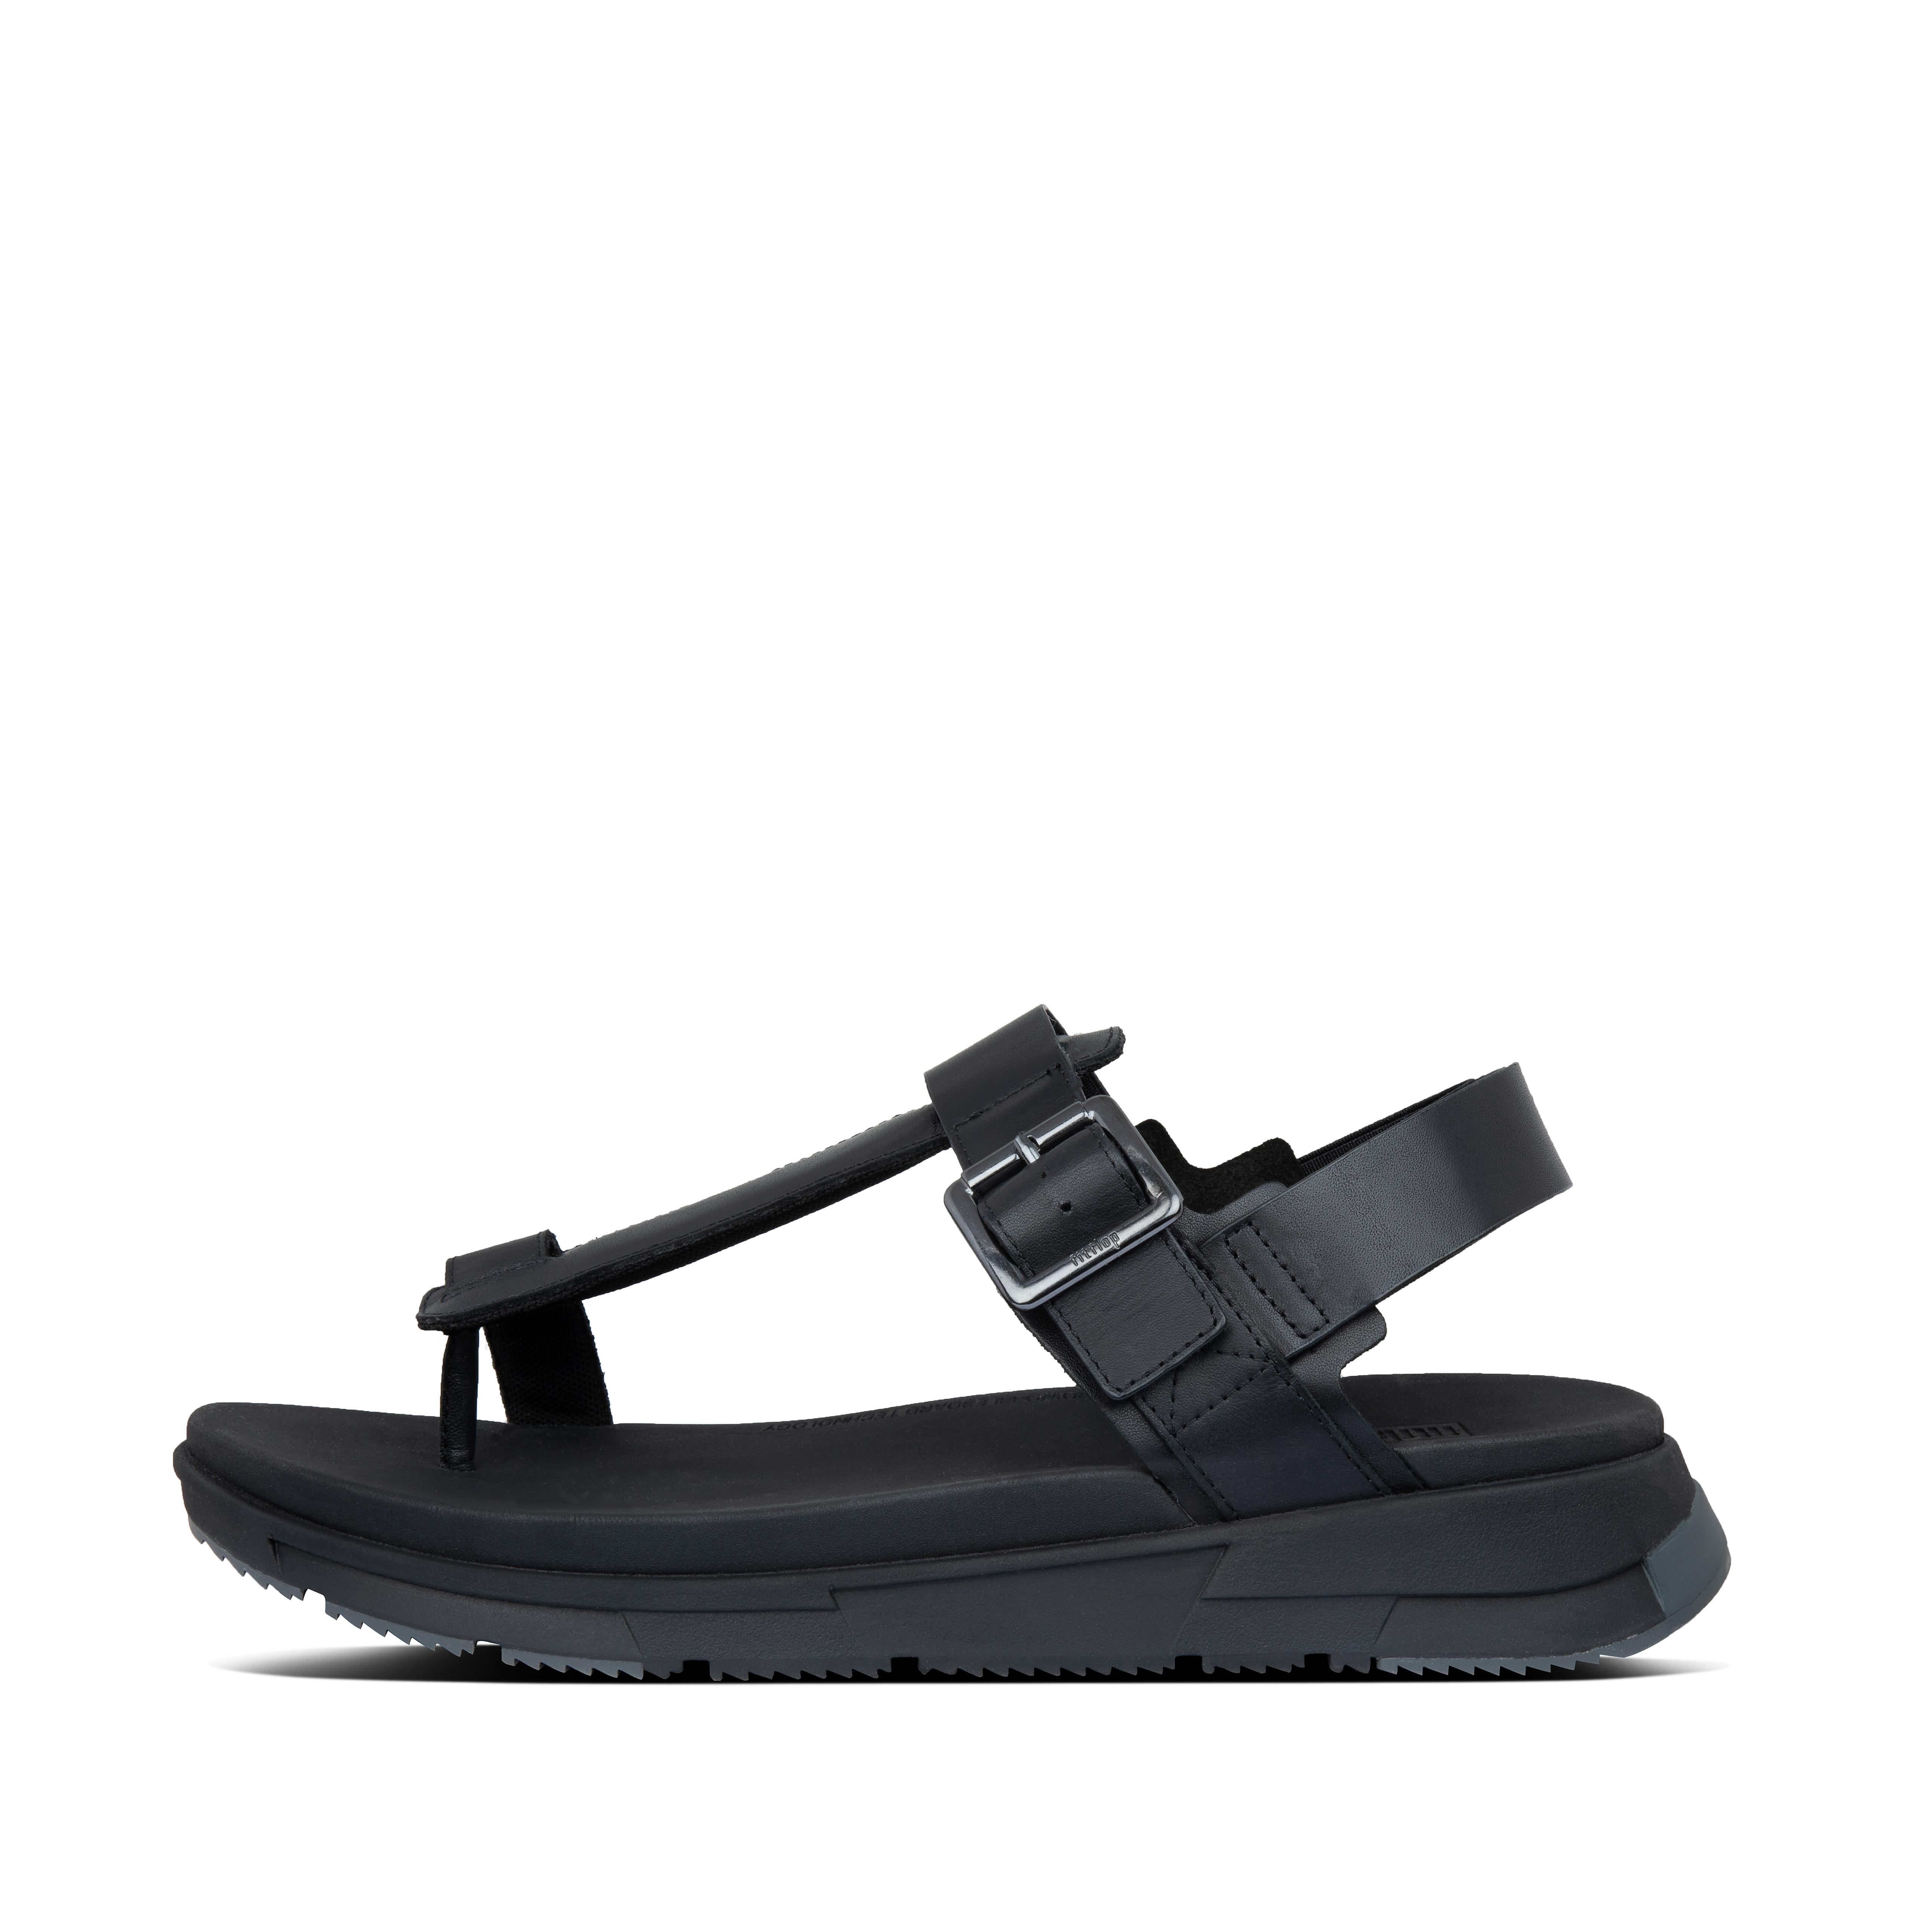 mens leather sandals with backstrap